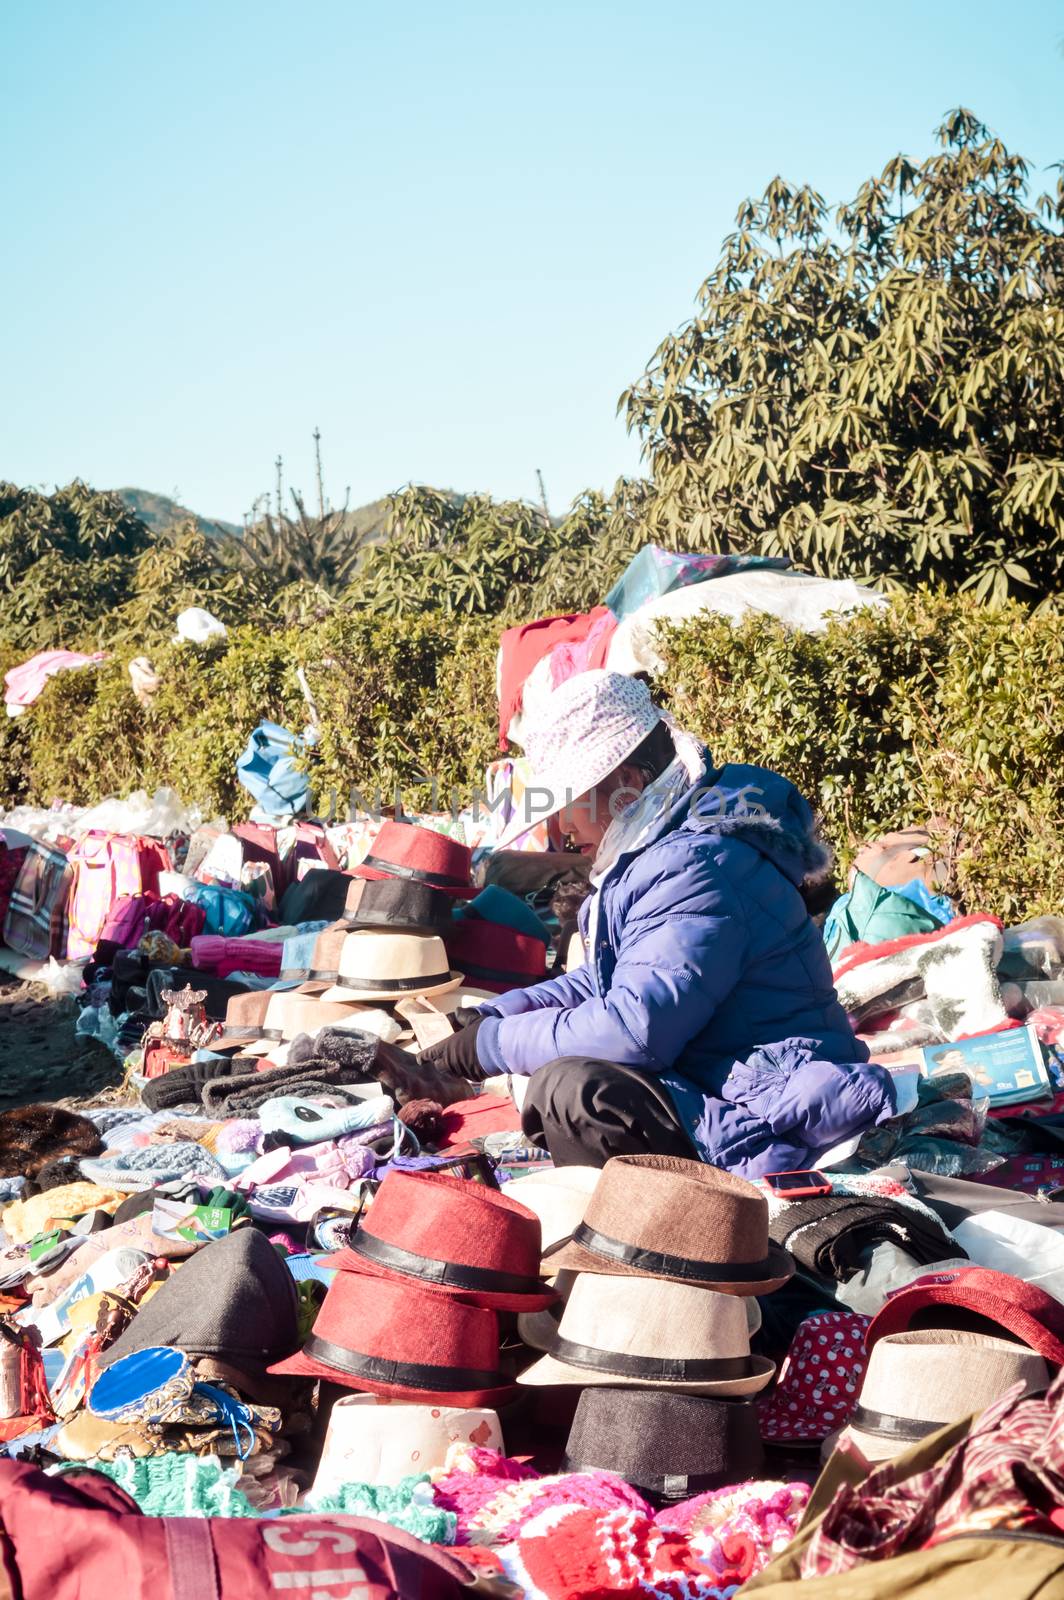 Police Bazar, Shillong Meghalaya India December 2018 - A vendor selling Headgear cap or hat of variety color tradition. Flea Market is the best shopping hub of local arts crafts handicrafts products. by sudiptabhowmick